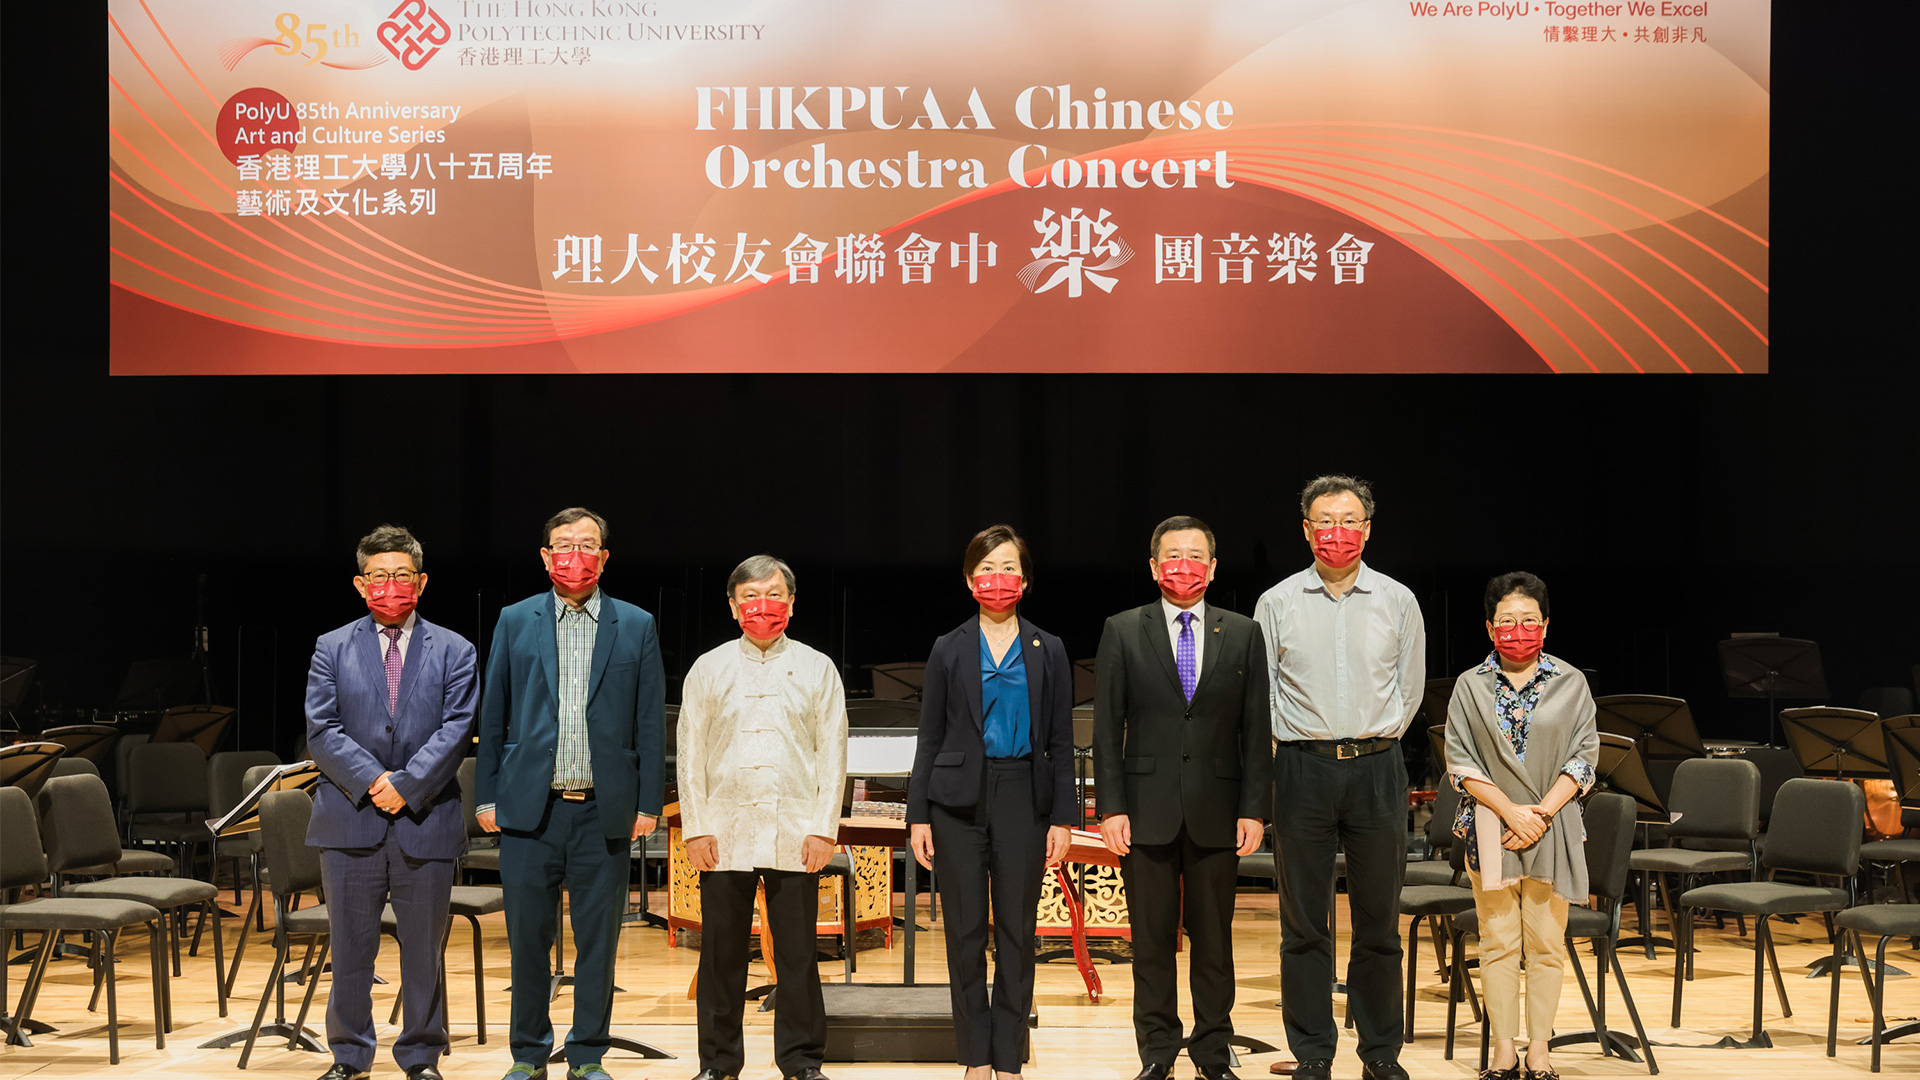 FHKPUAA Chinese Orchestra Concert Photo